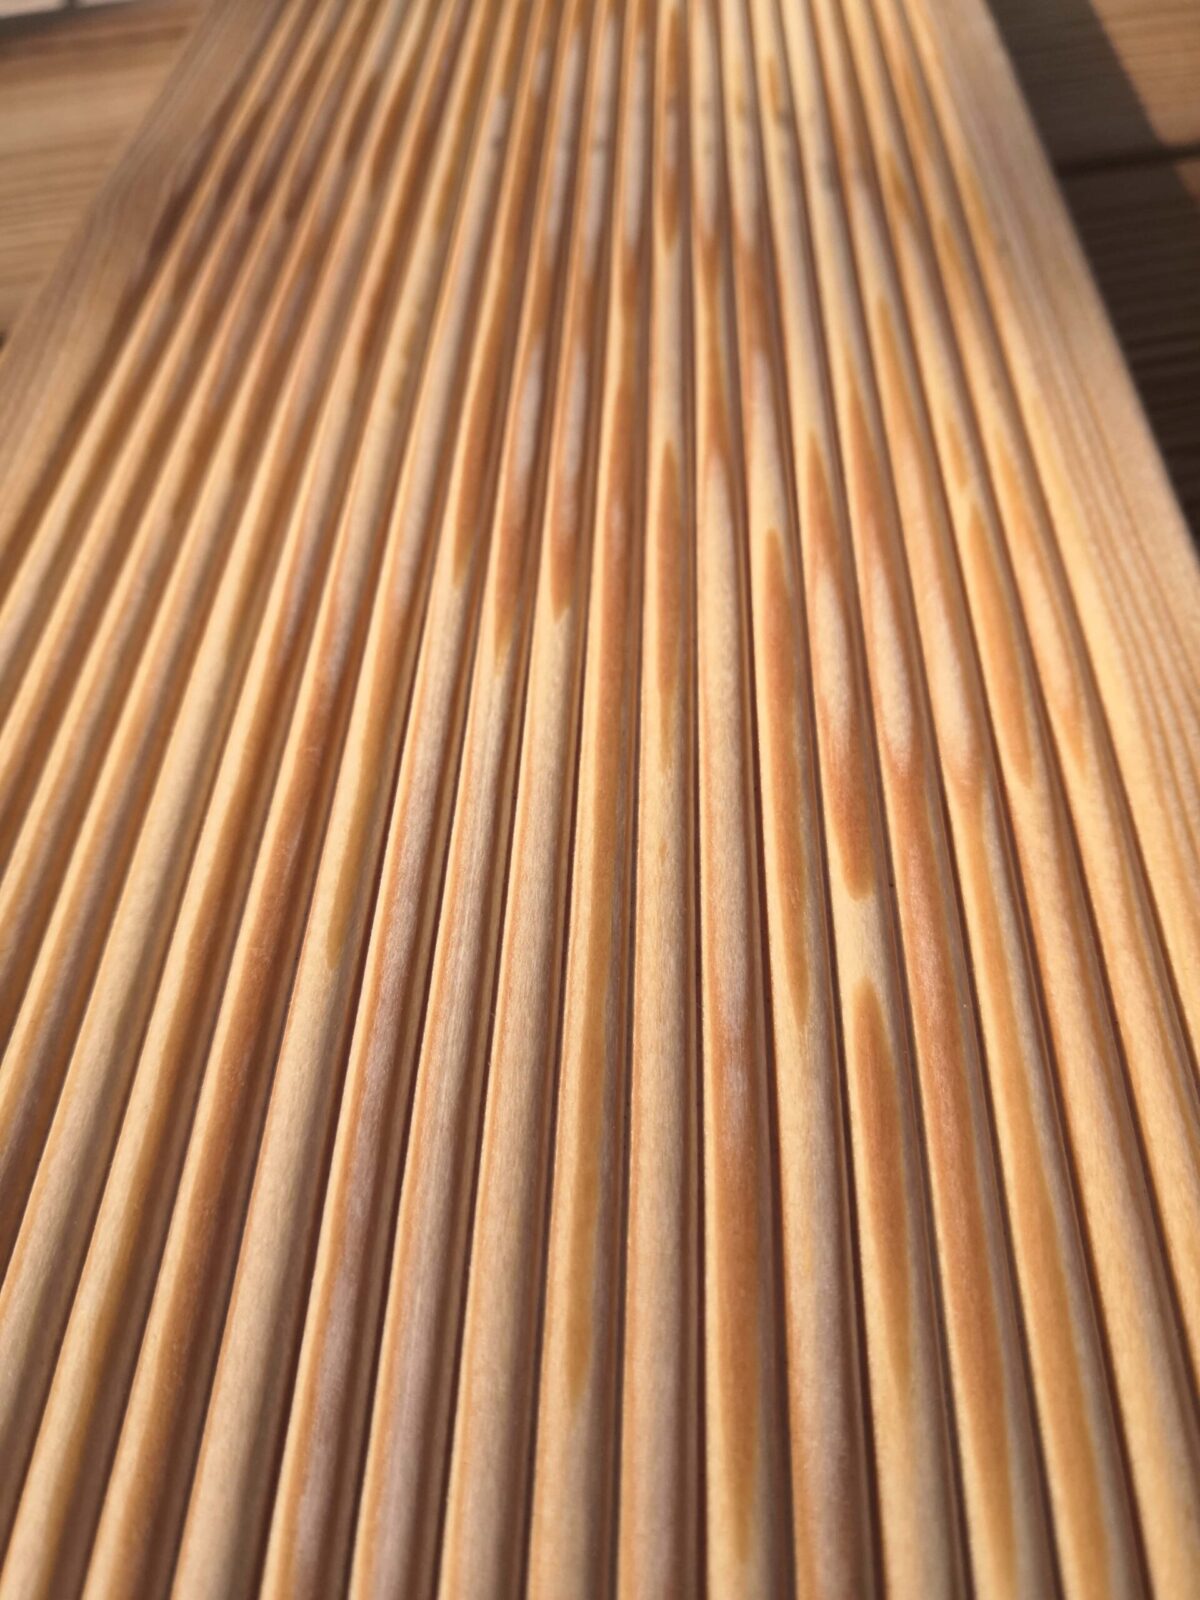 Siberian Larch Grooved Board